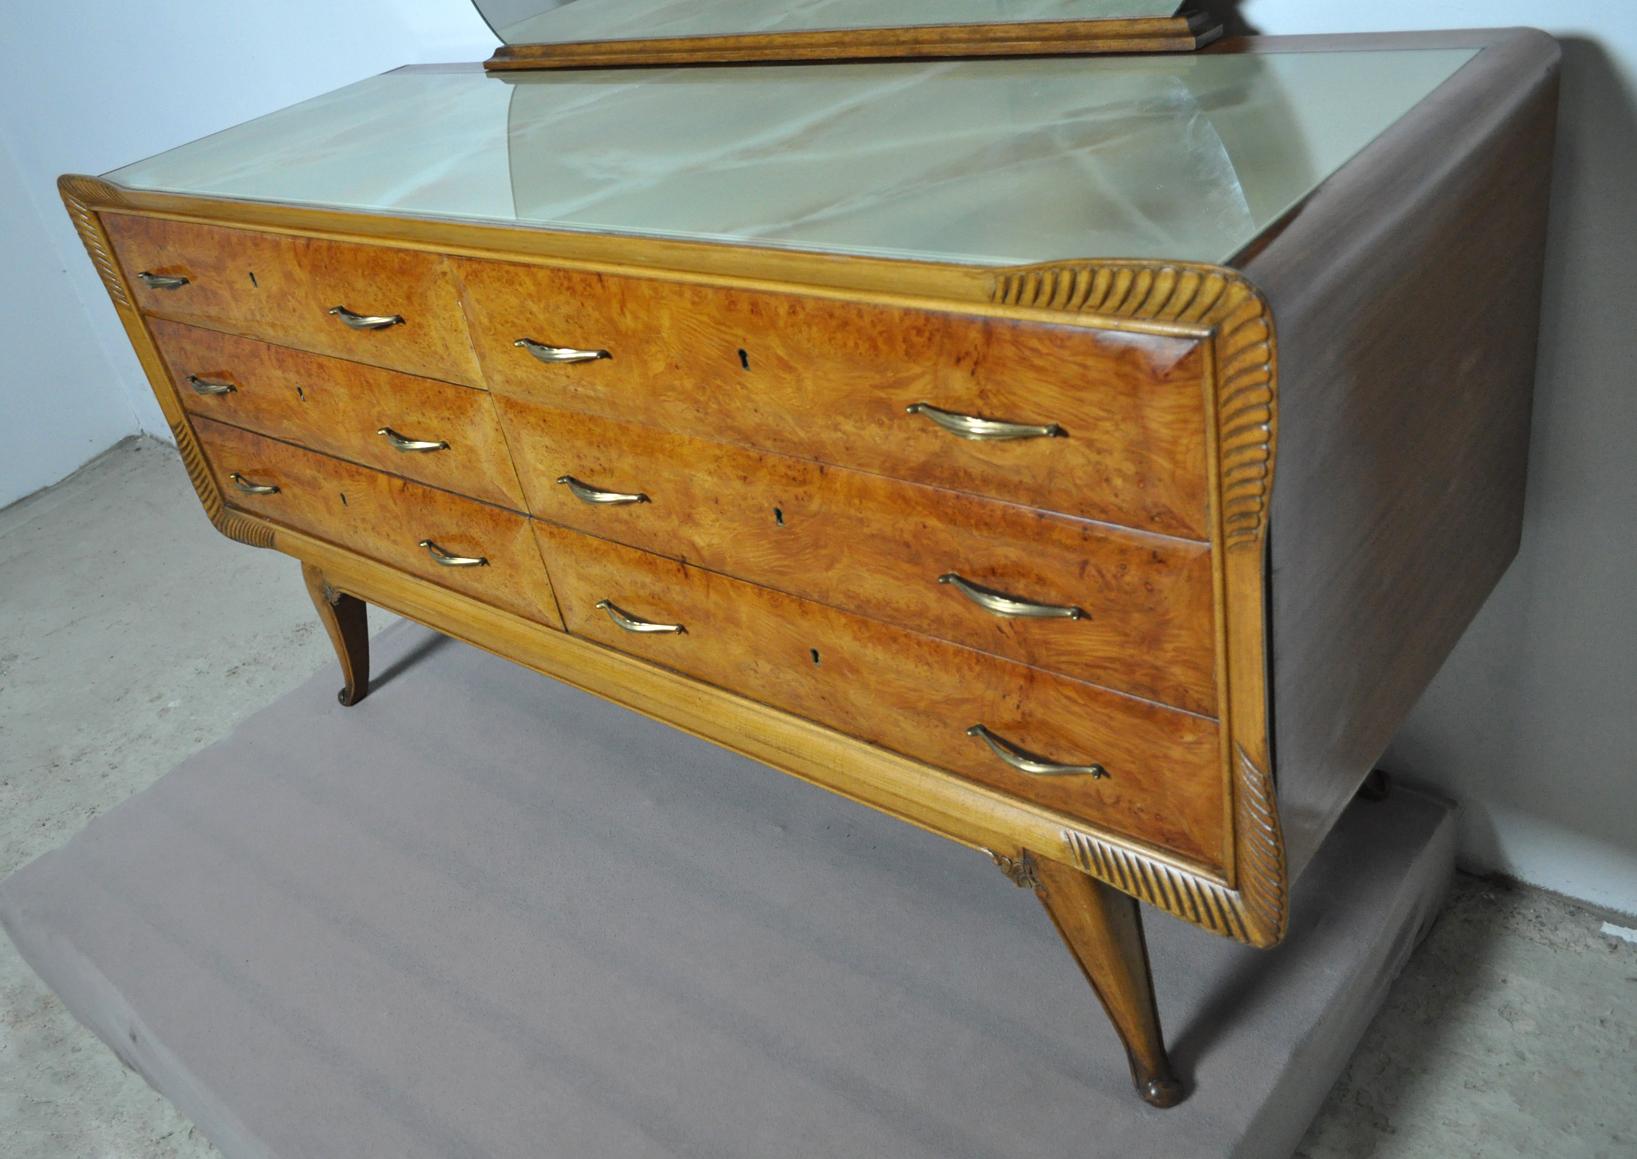 Italian Art Deco walnut and bird's-eye maple commode with mirror.
Six curved drawers with brass handles and a marbled glass top.
Fine carved details on legs and front.

Very good condition with a few related marks. No scratches on